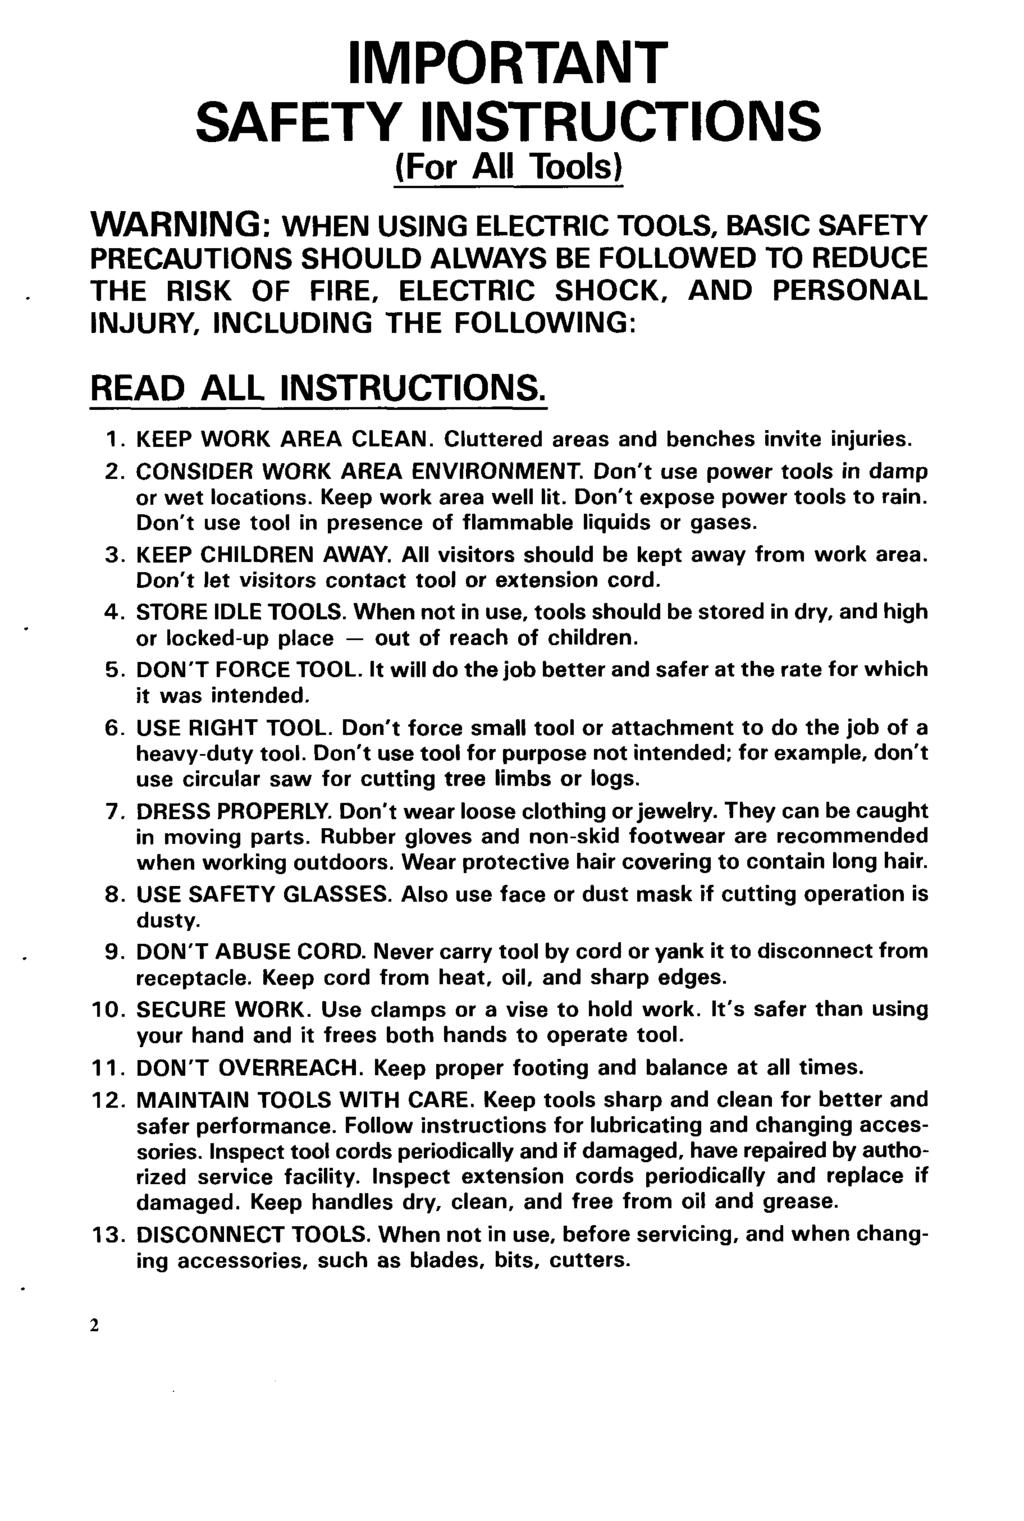 IMPORTANT SAFETY INSTRUCTIONS (For All Tools) WARNING: WHEN USING ELECTRIC TOOLS, BASIC SAFETY PRECAUTIONS SHOULD ALWAYS BE FOLLOWED TO REDUCE.